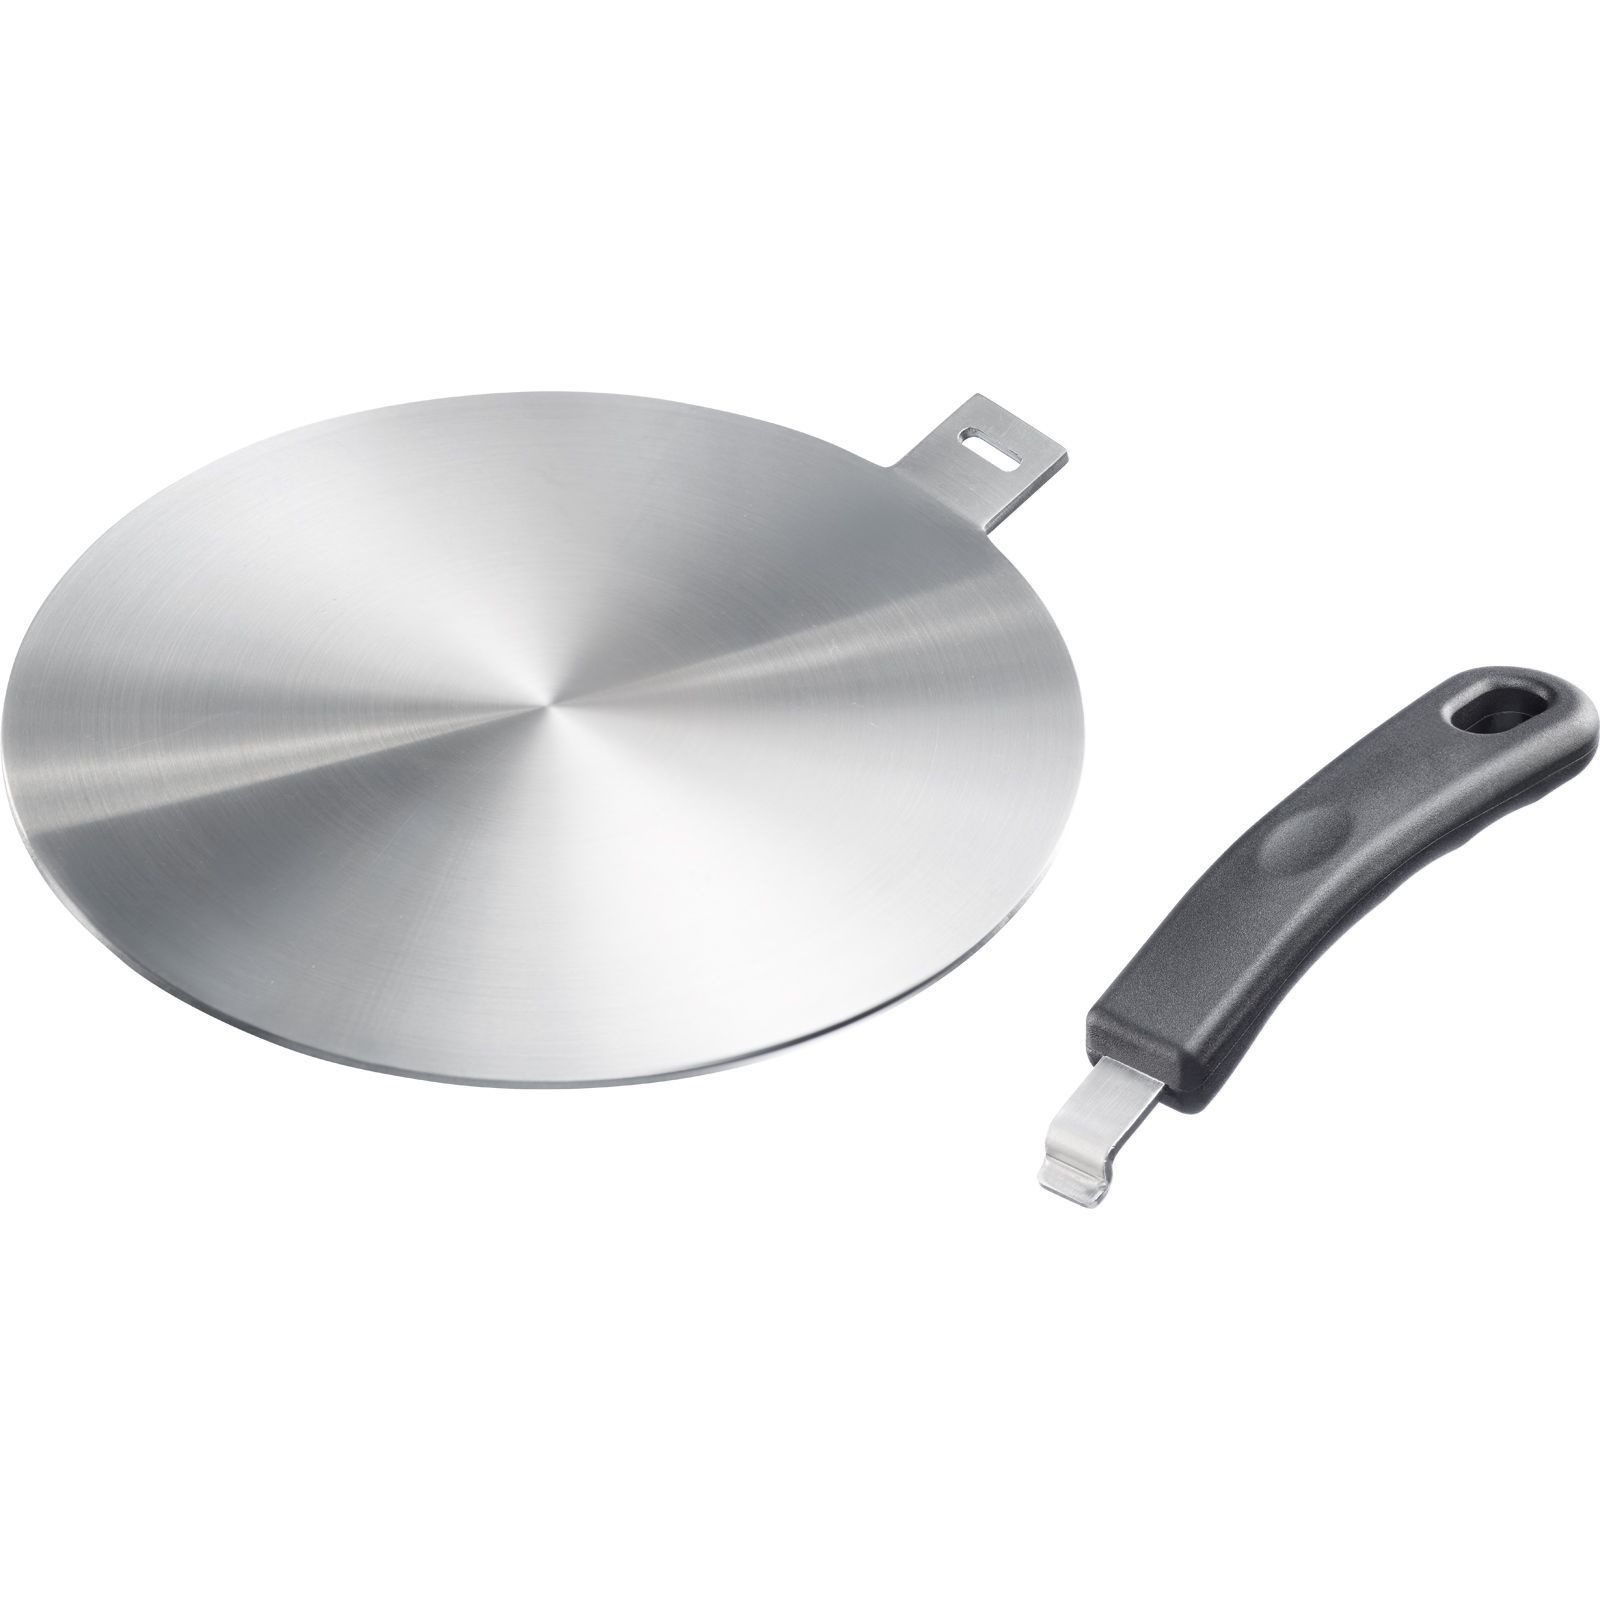 Westmark Induction Adapter Plate – Adapter Plate for Induction stoves to  Make Conventional Pans Suitable for Induction, Plate with Handle –  Stainless